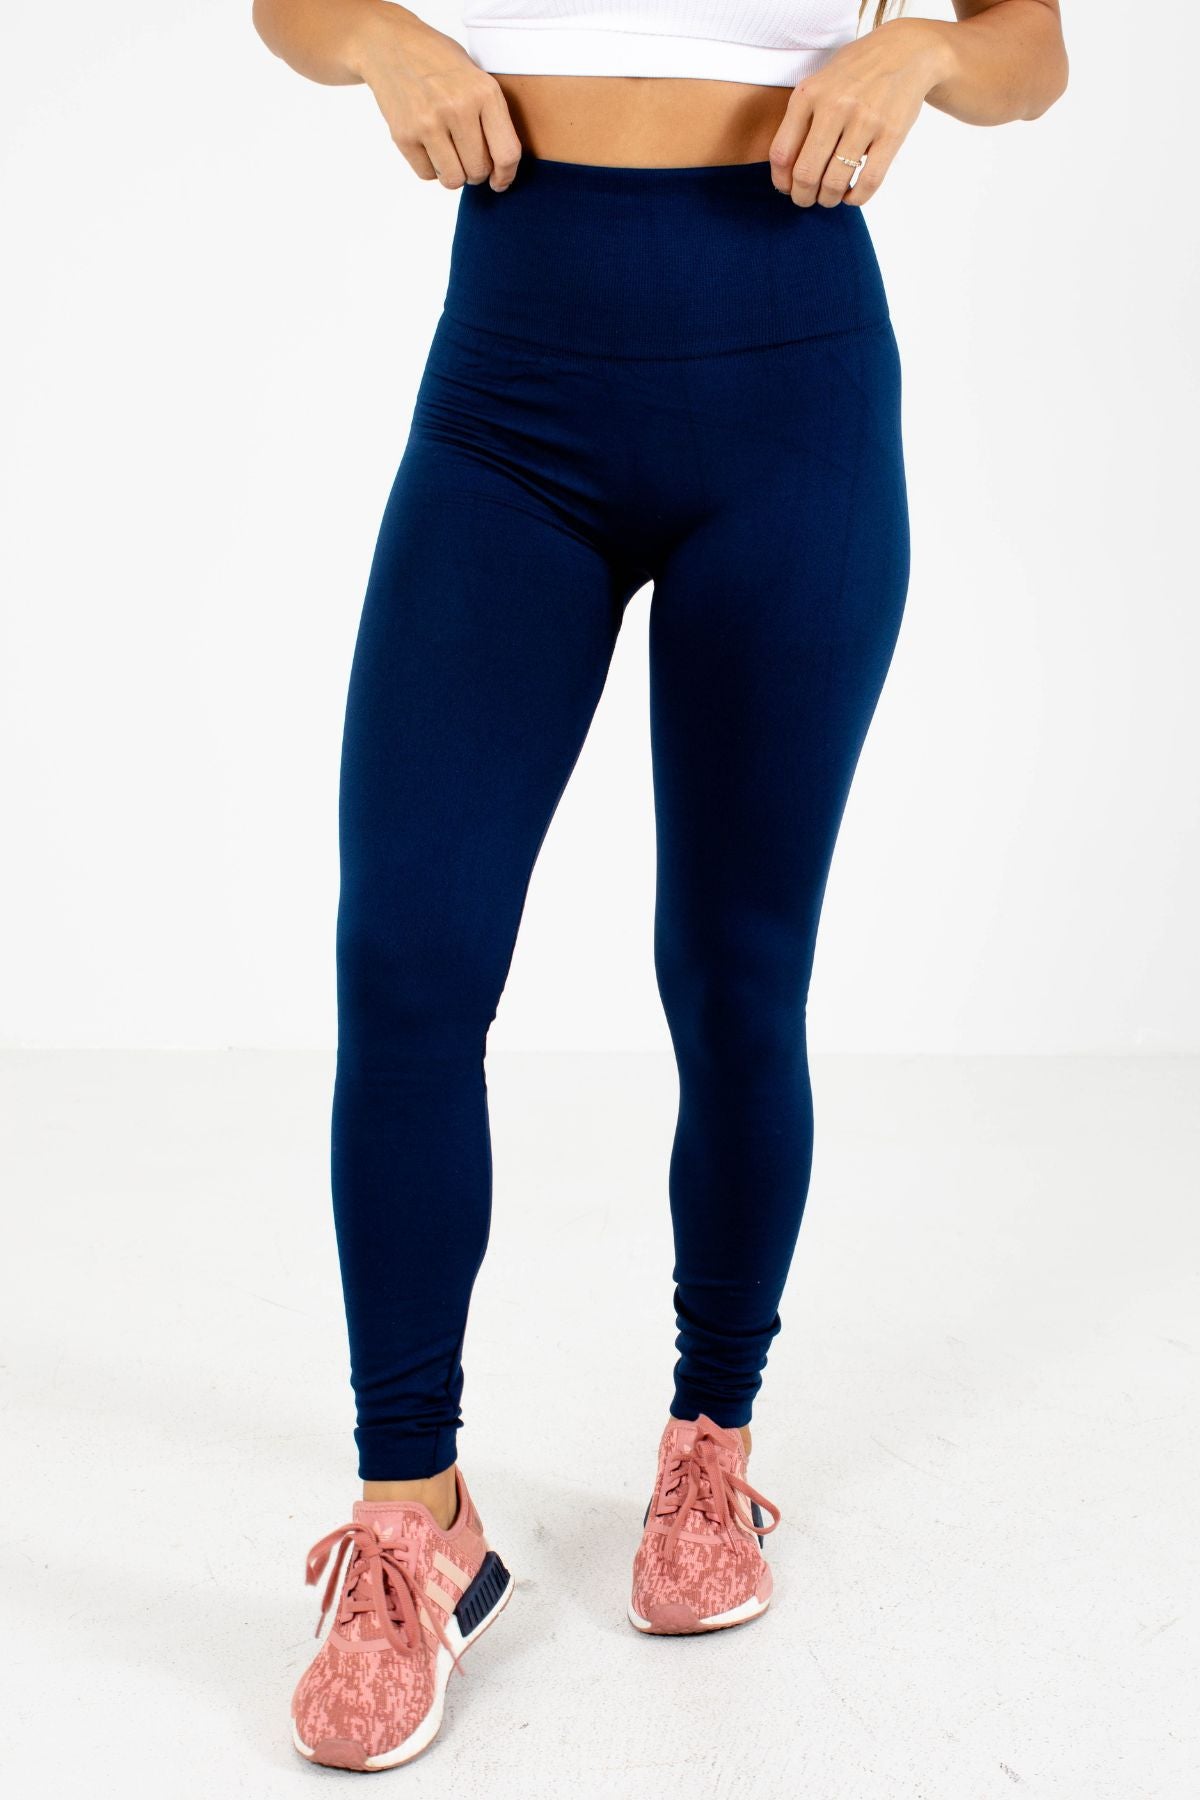 Fleece leggings for girls-Shop for products with free shipping